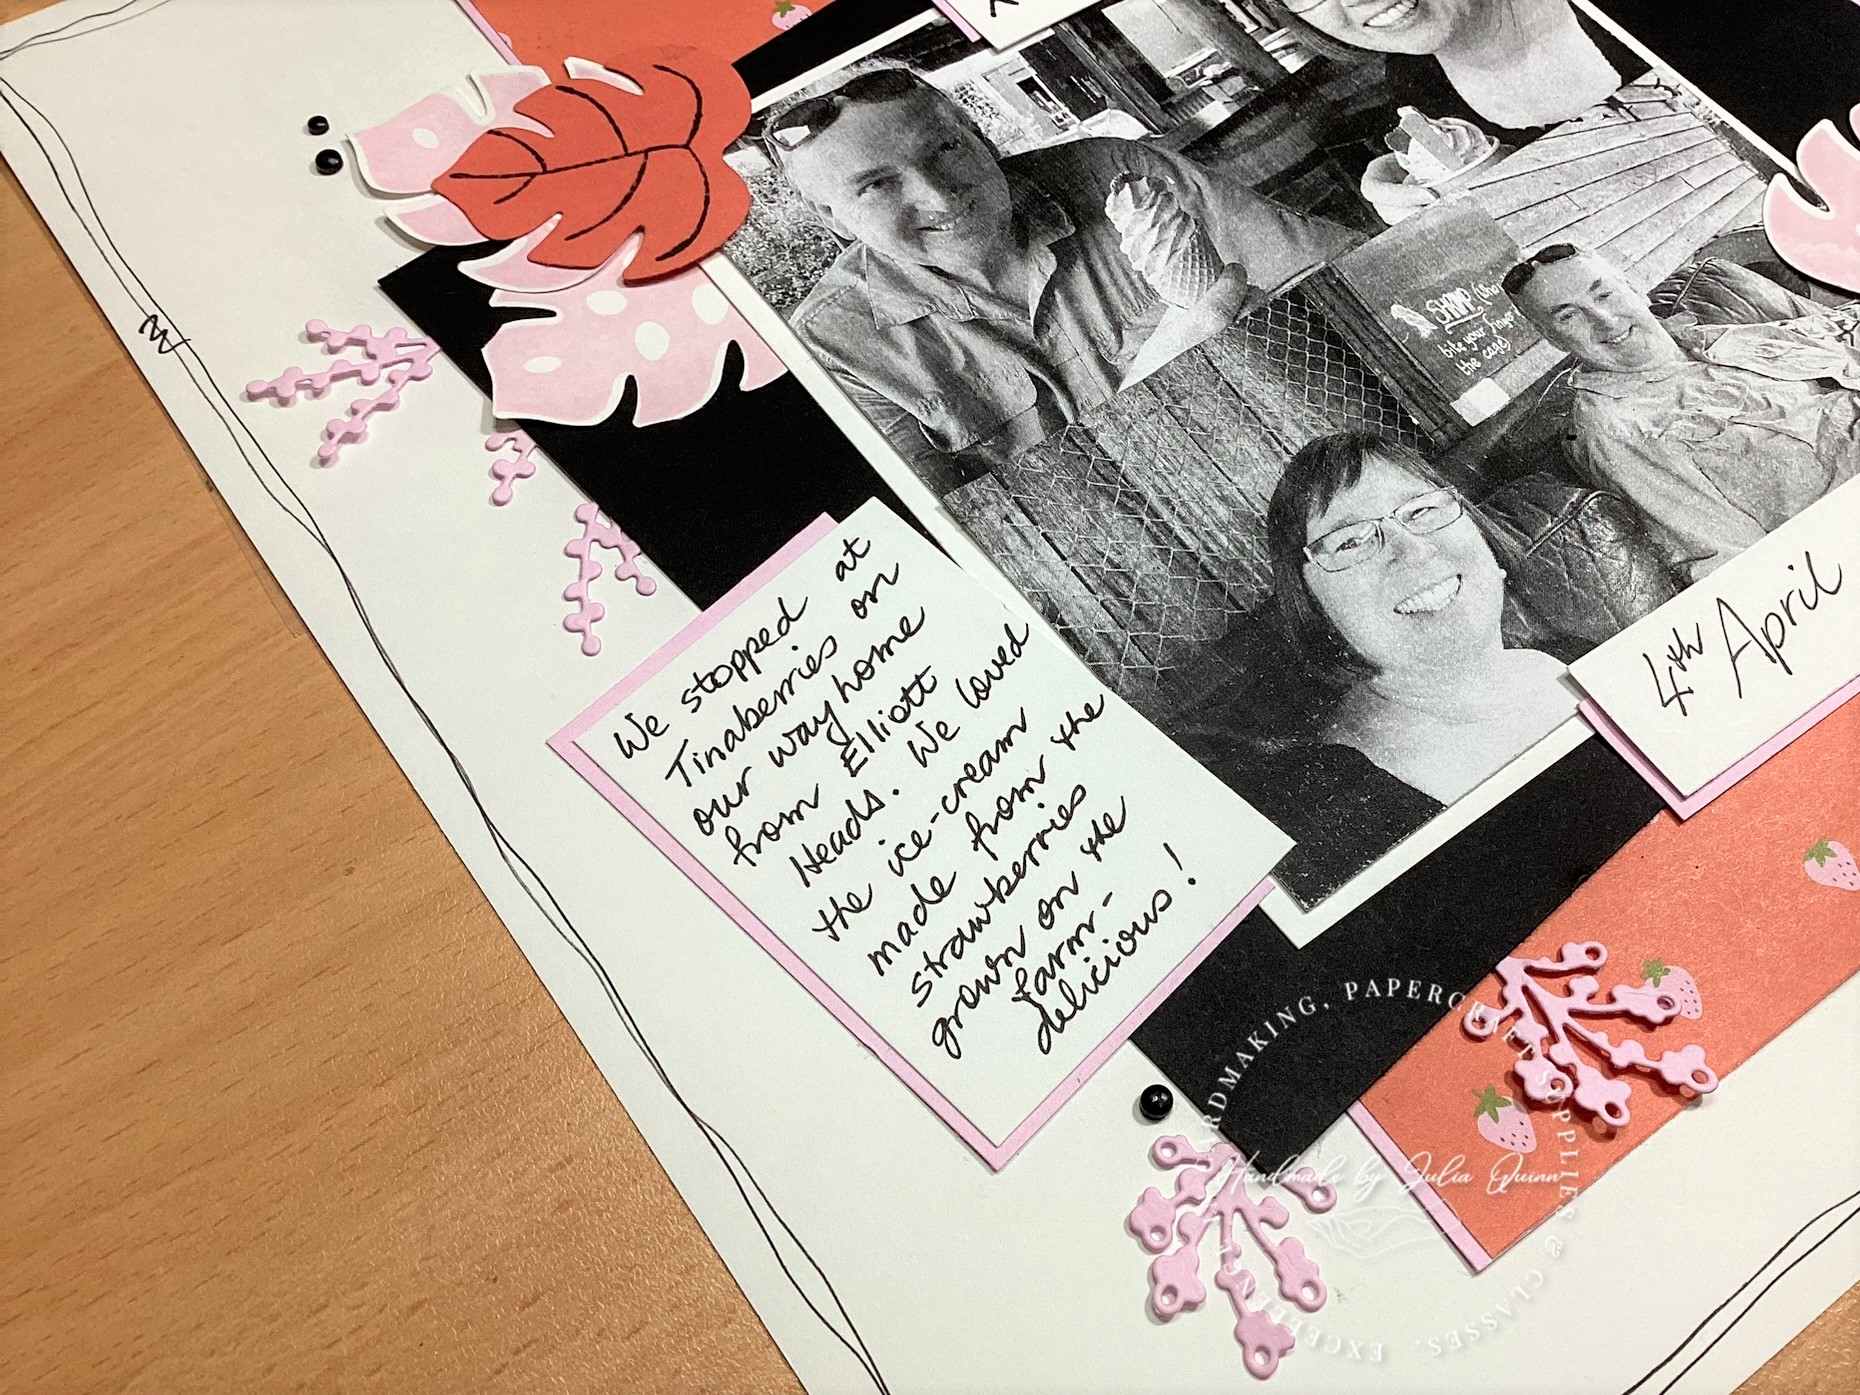 handmade by Julia Quinn - cardmaking and supplies: Black and White  scrapbooking